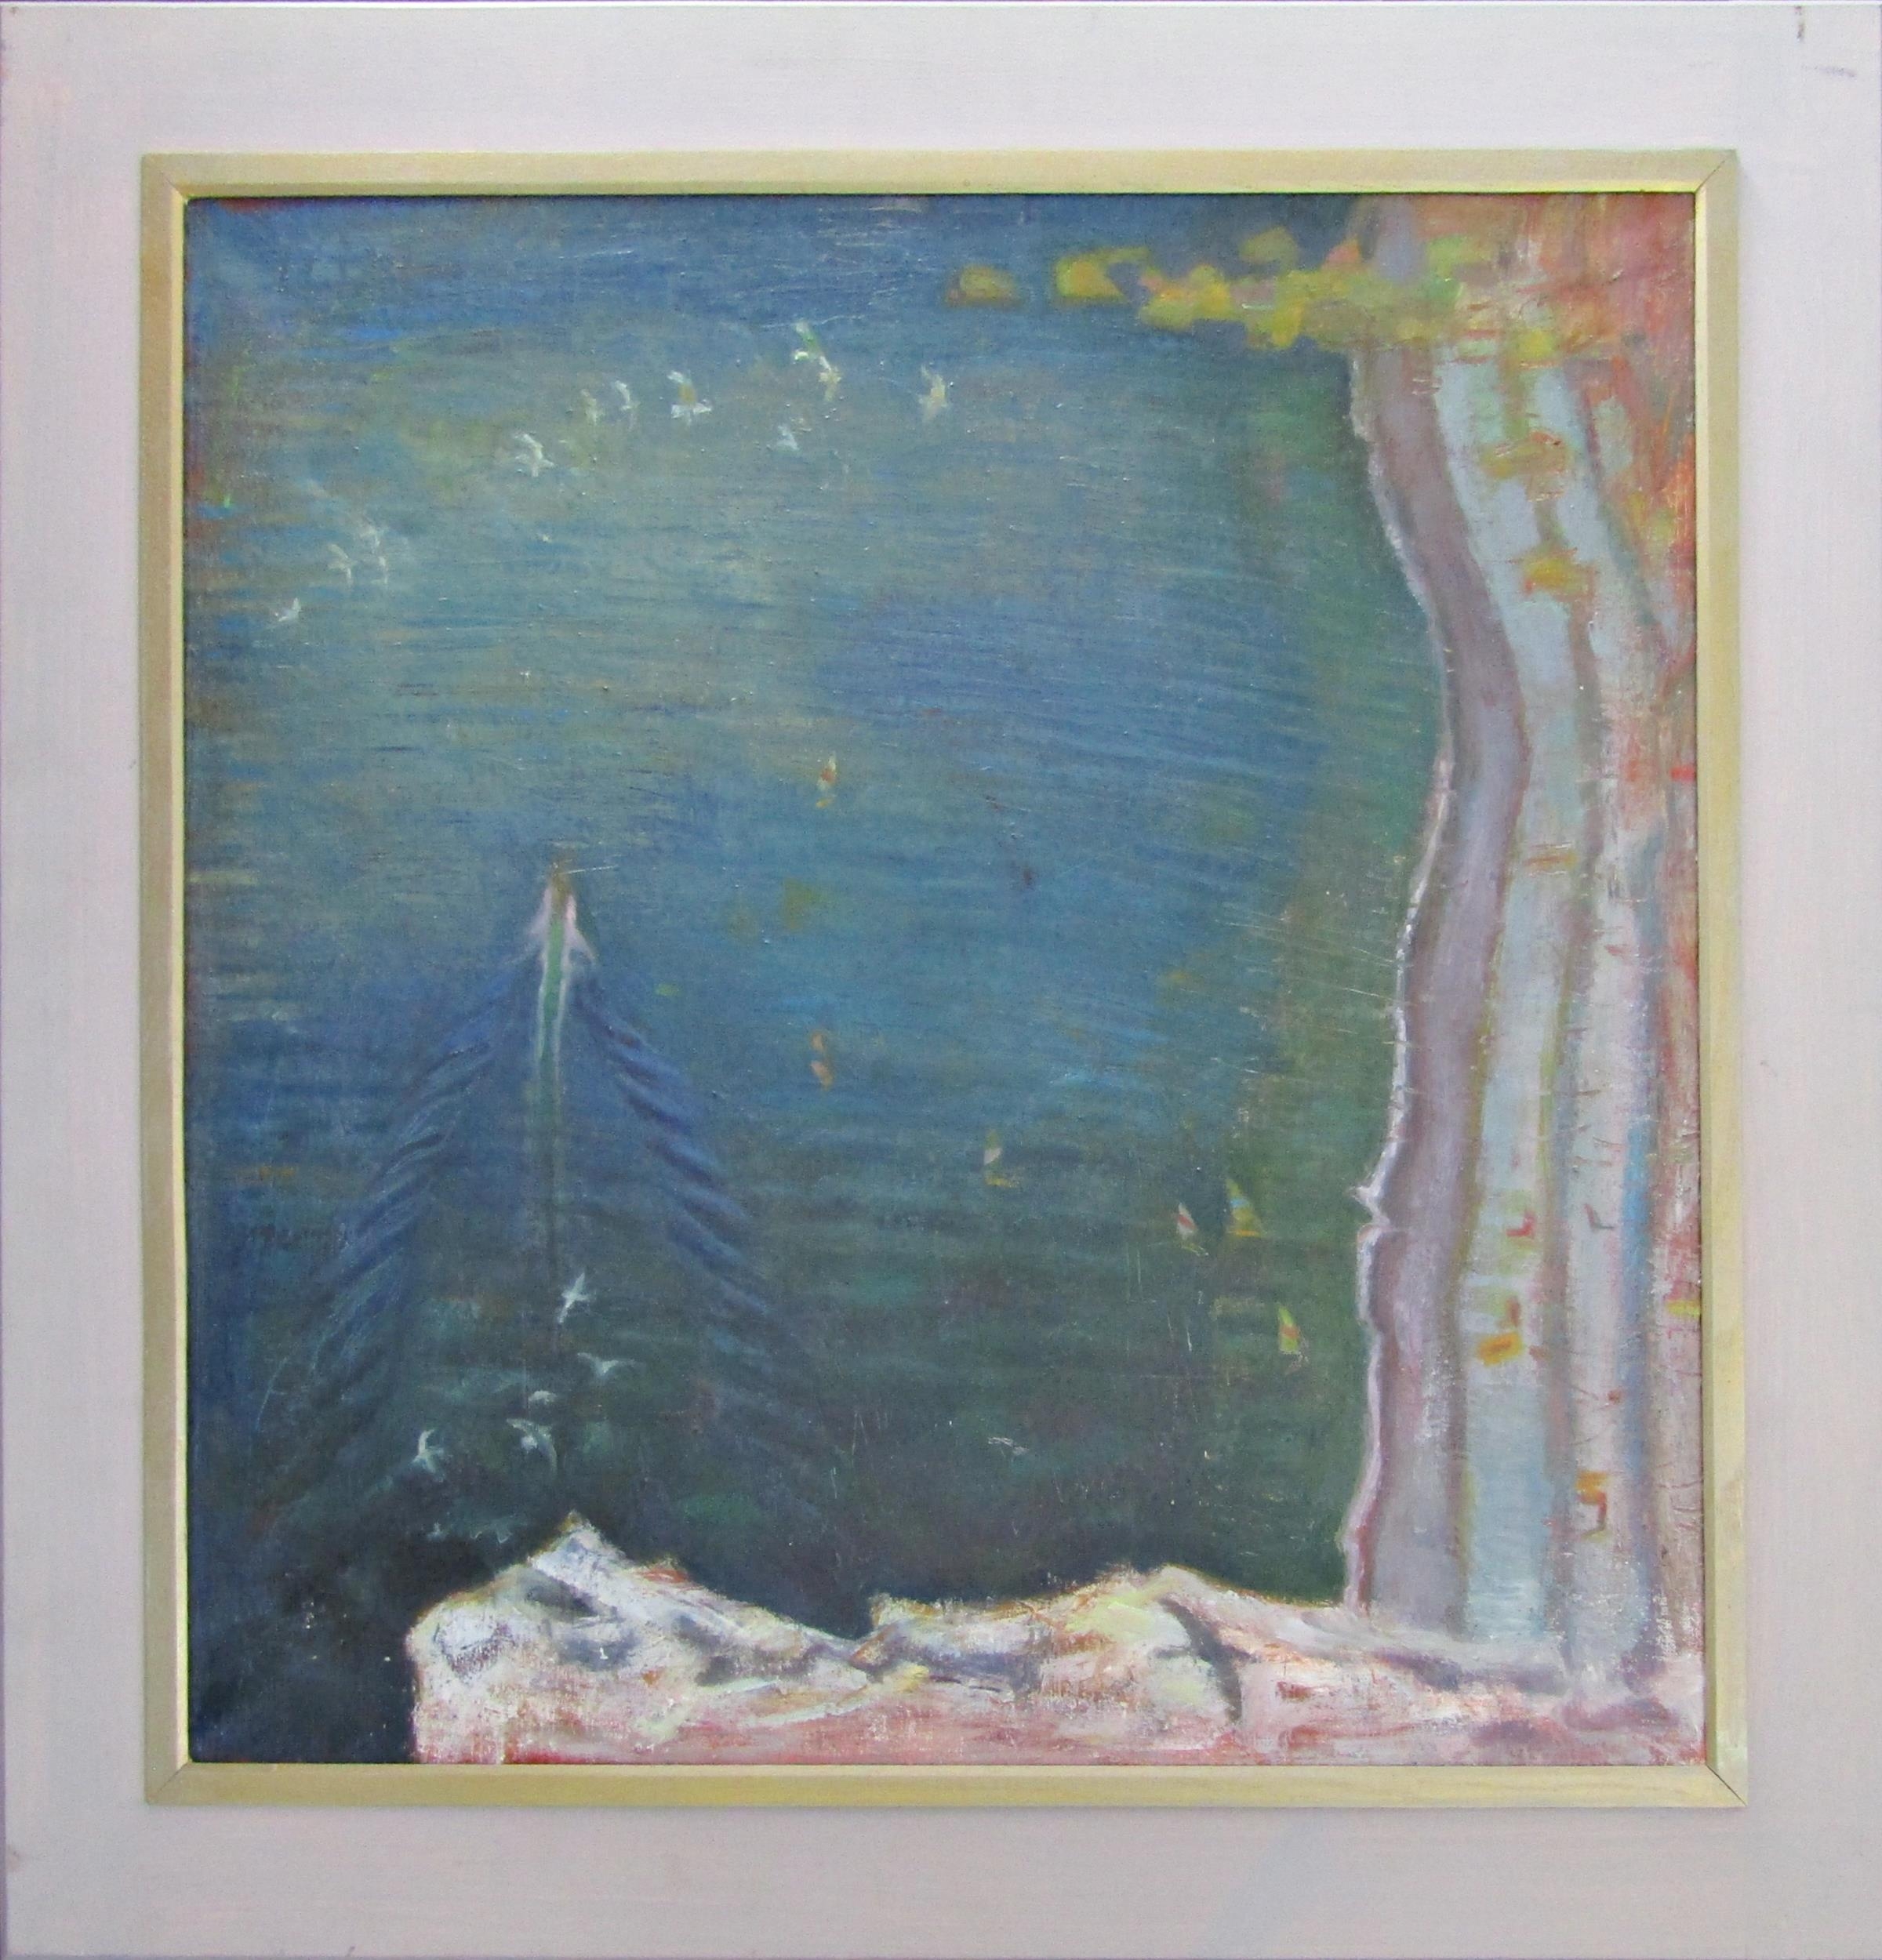 ROBERT ORGAN (b.1933) 'BEER HEAD I' oil on canvas, signed and dated 84 to verso 59.5cm x 59.6cm - Image 2 of 3